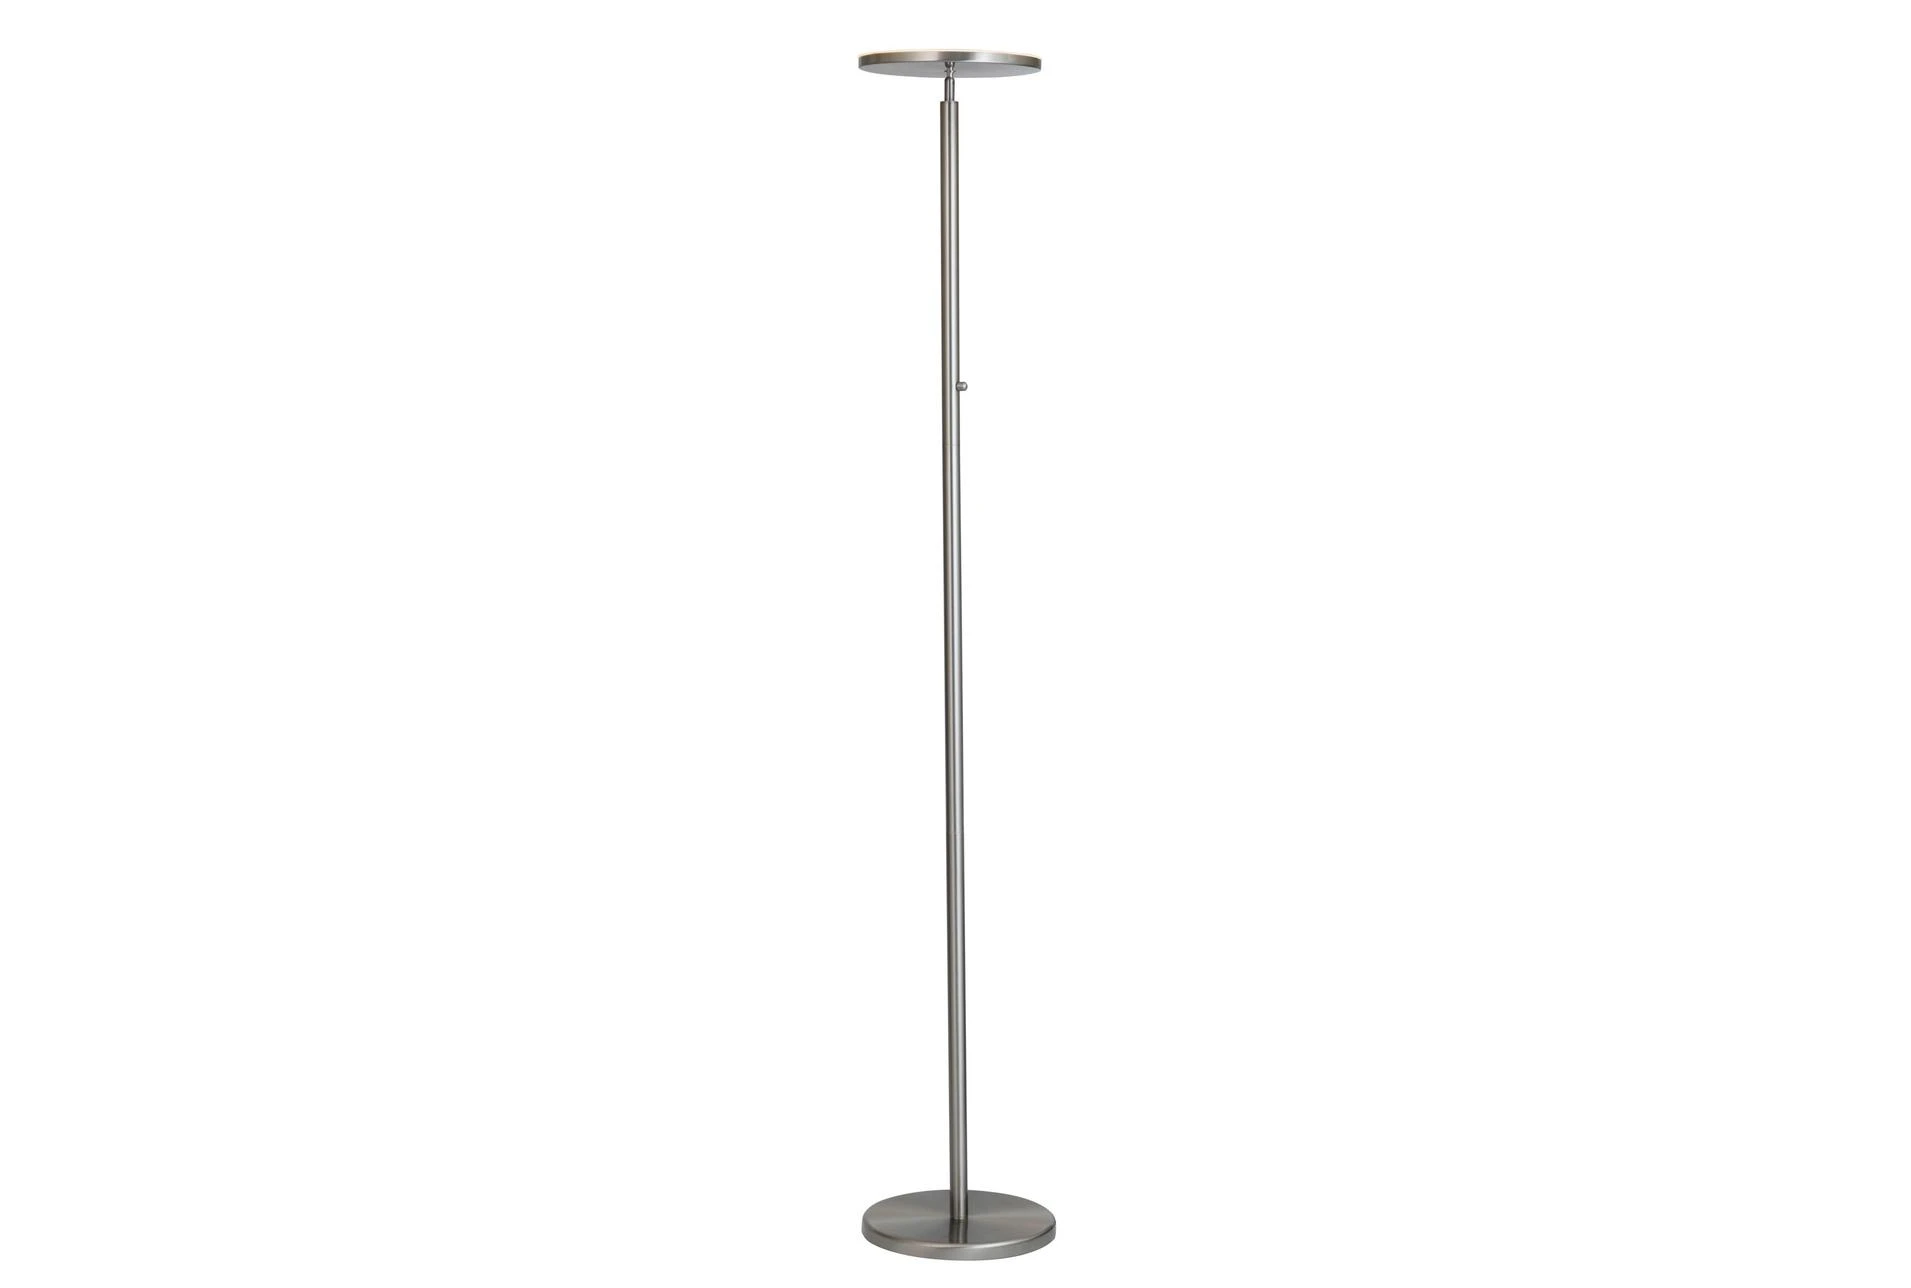 72 Inch Brushed Nickel Metal Adjustable Dimmable Led Torchiere Floor Lamp |  Living Spaces